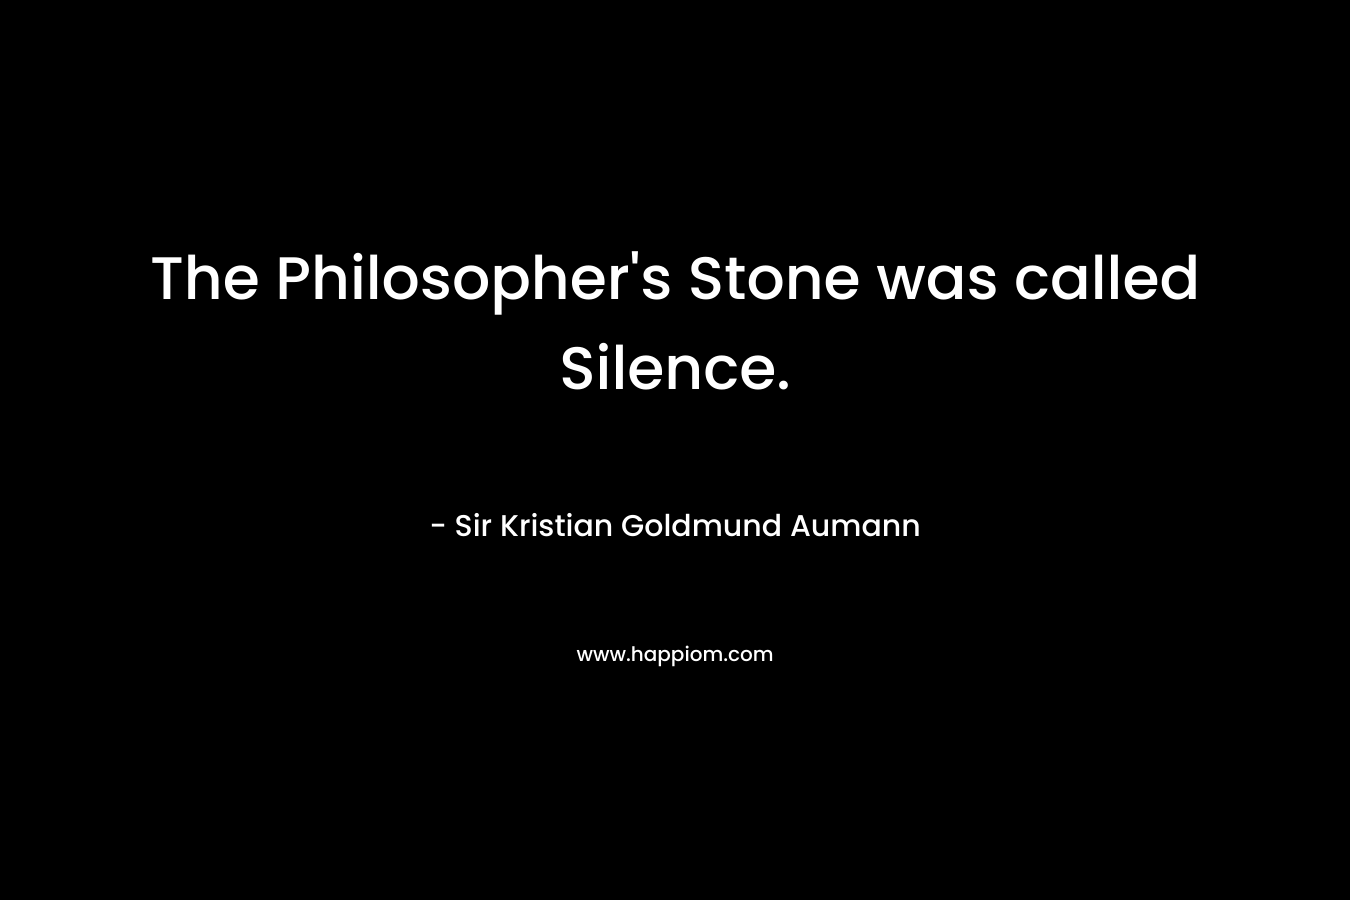 The Philosopher's Stone was called Silence.